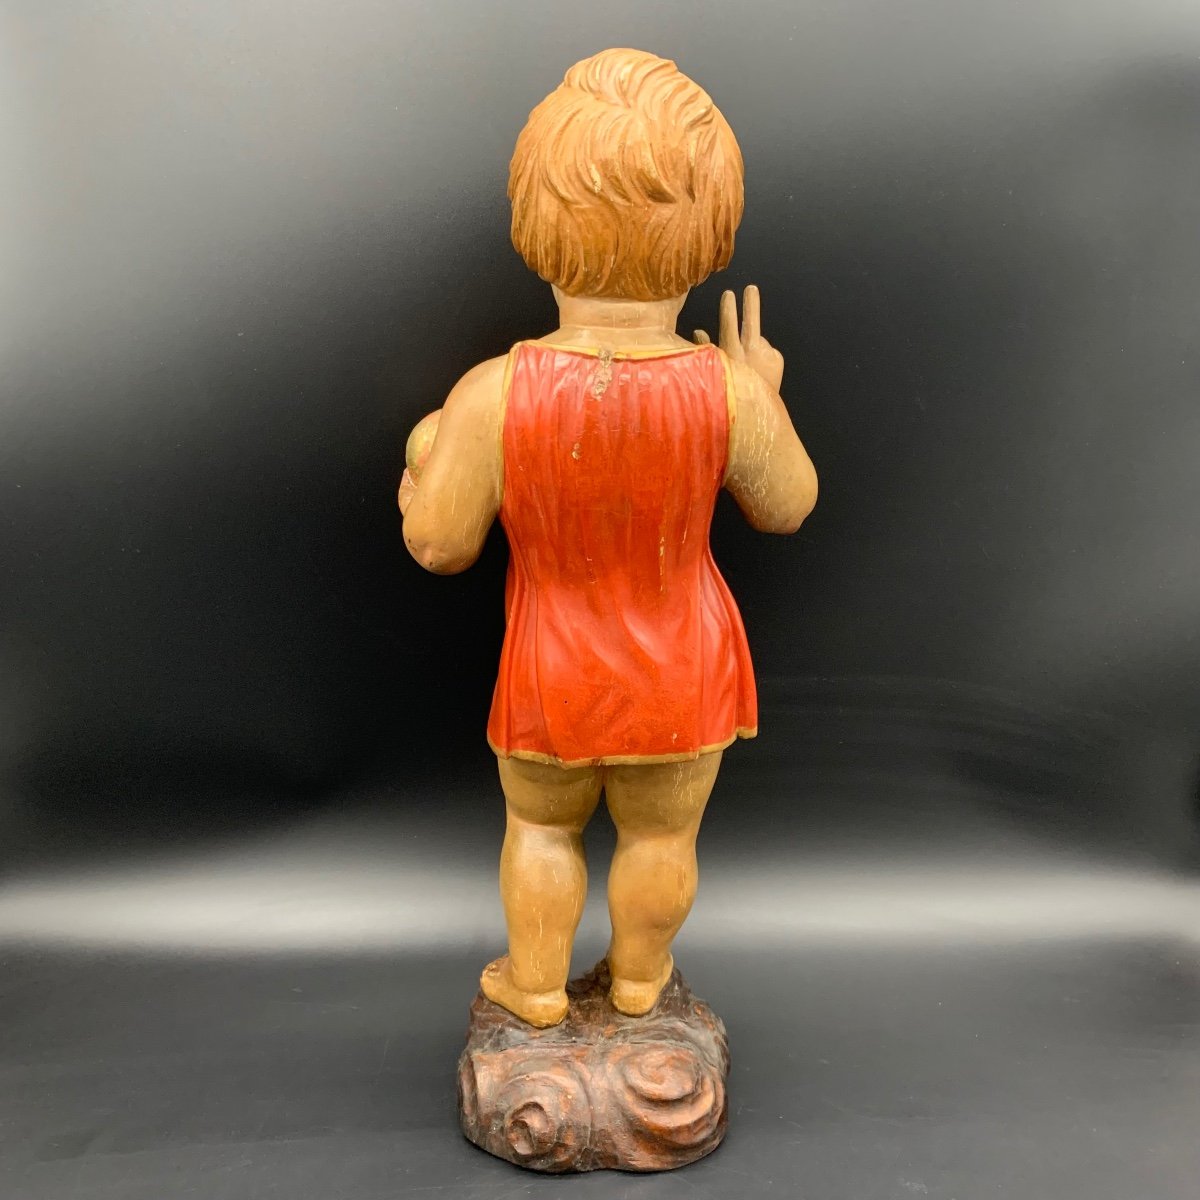 Polychrome Wooden Sculpture Depicting The Blessing Child Jesus- 19th Century-photo-3